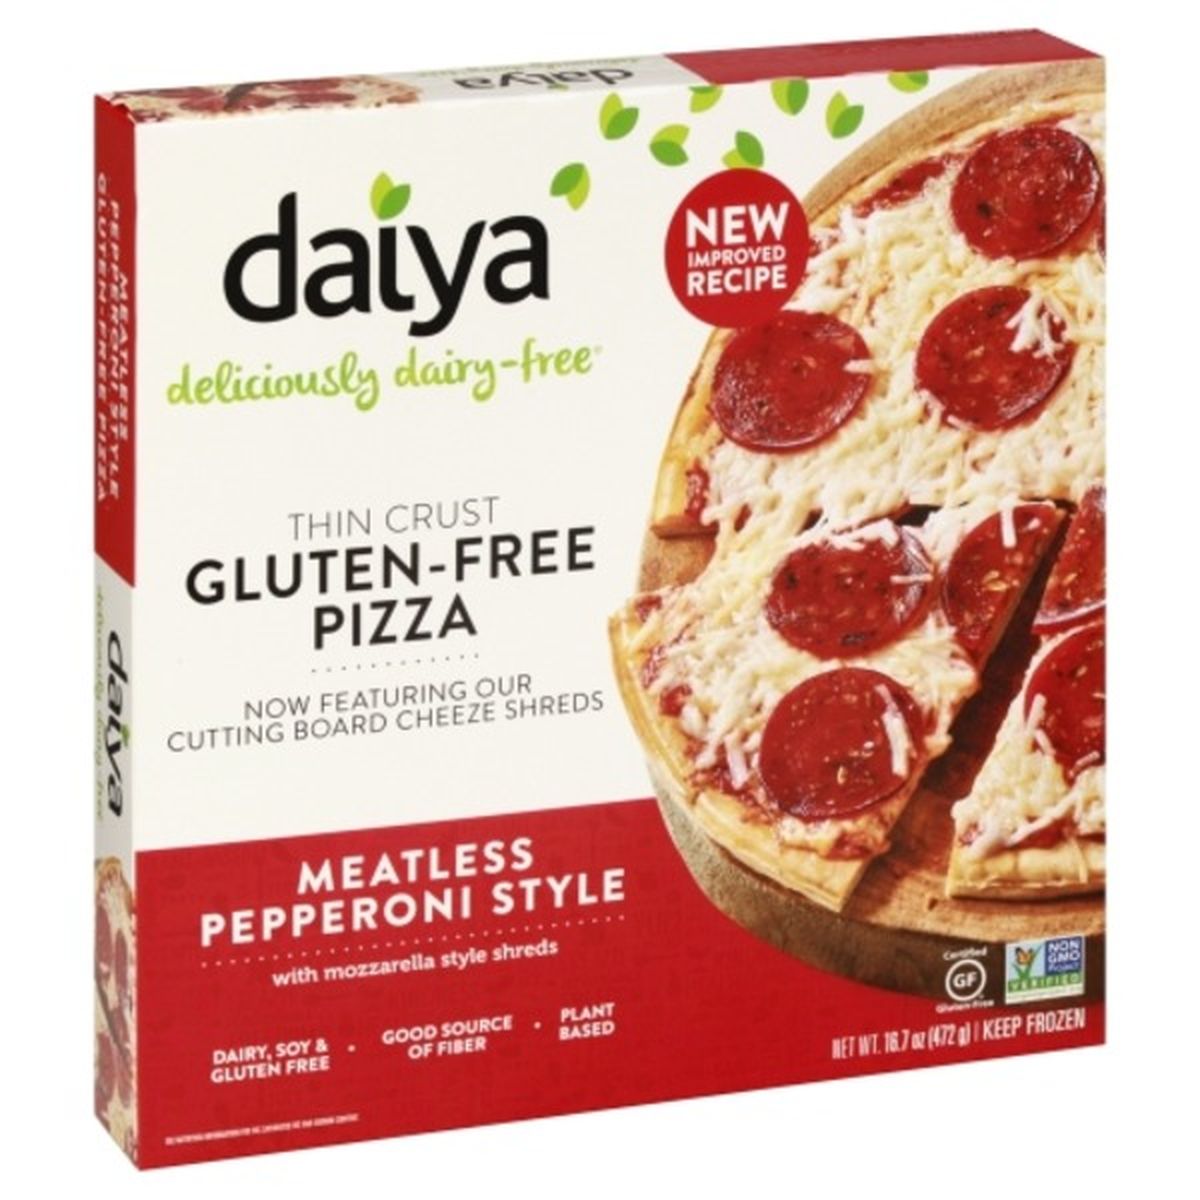 Calories in Daiya Pizza, Gluten-Free, Thin Crust, Meatless Pepperoni Style